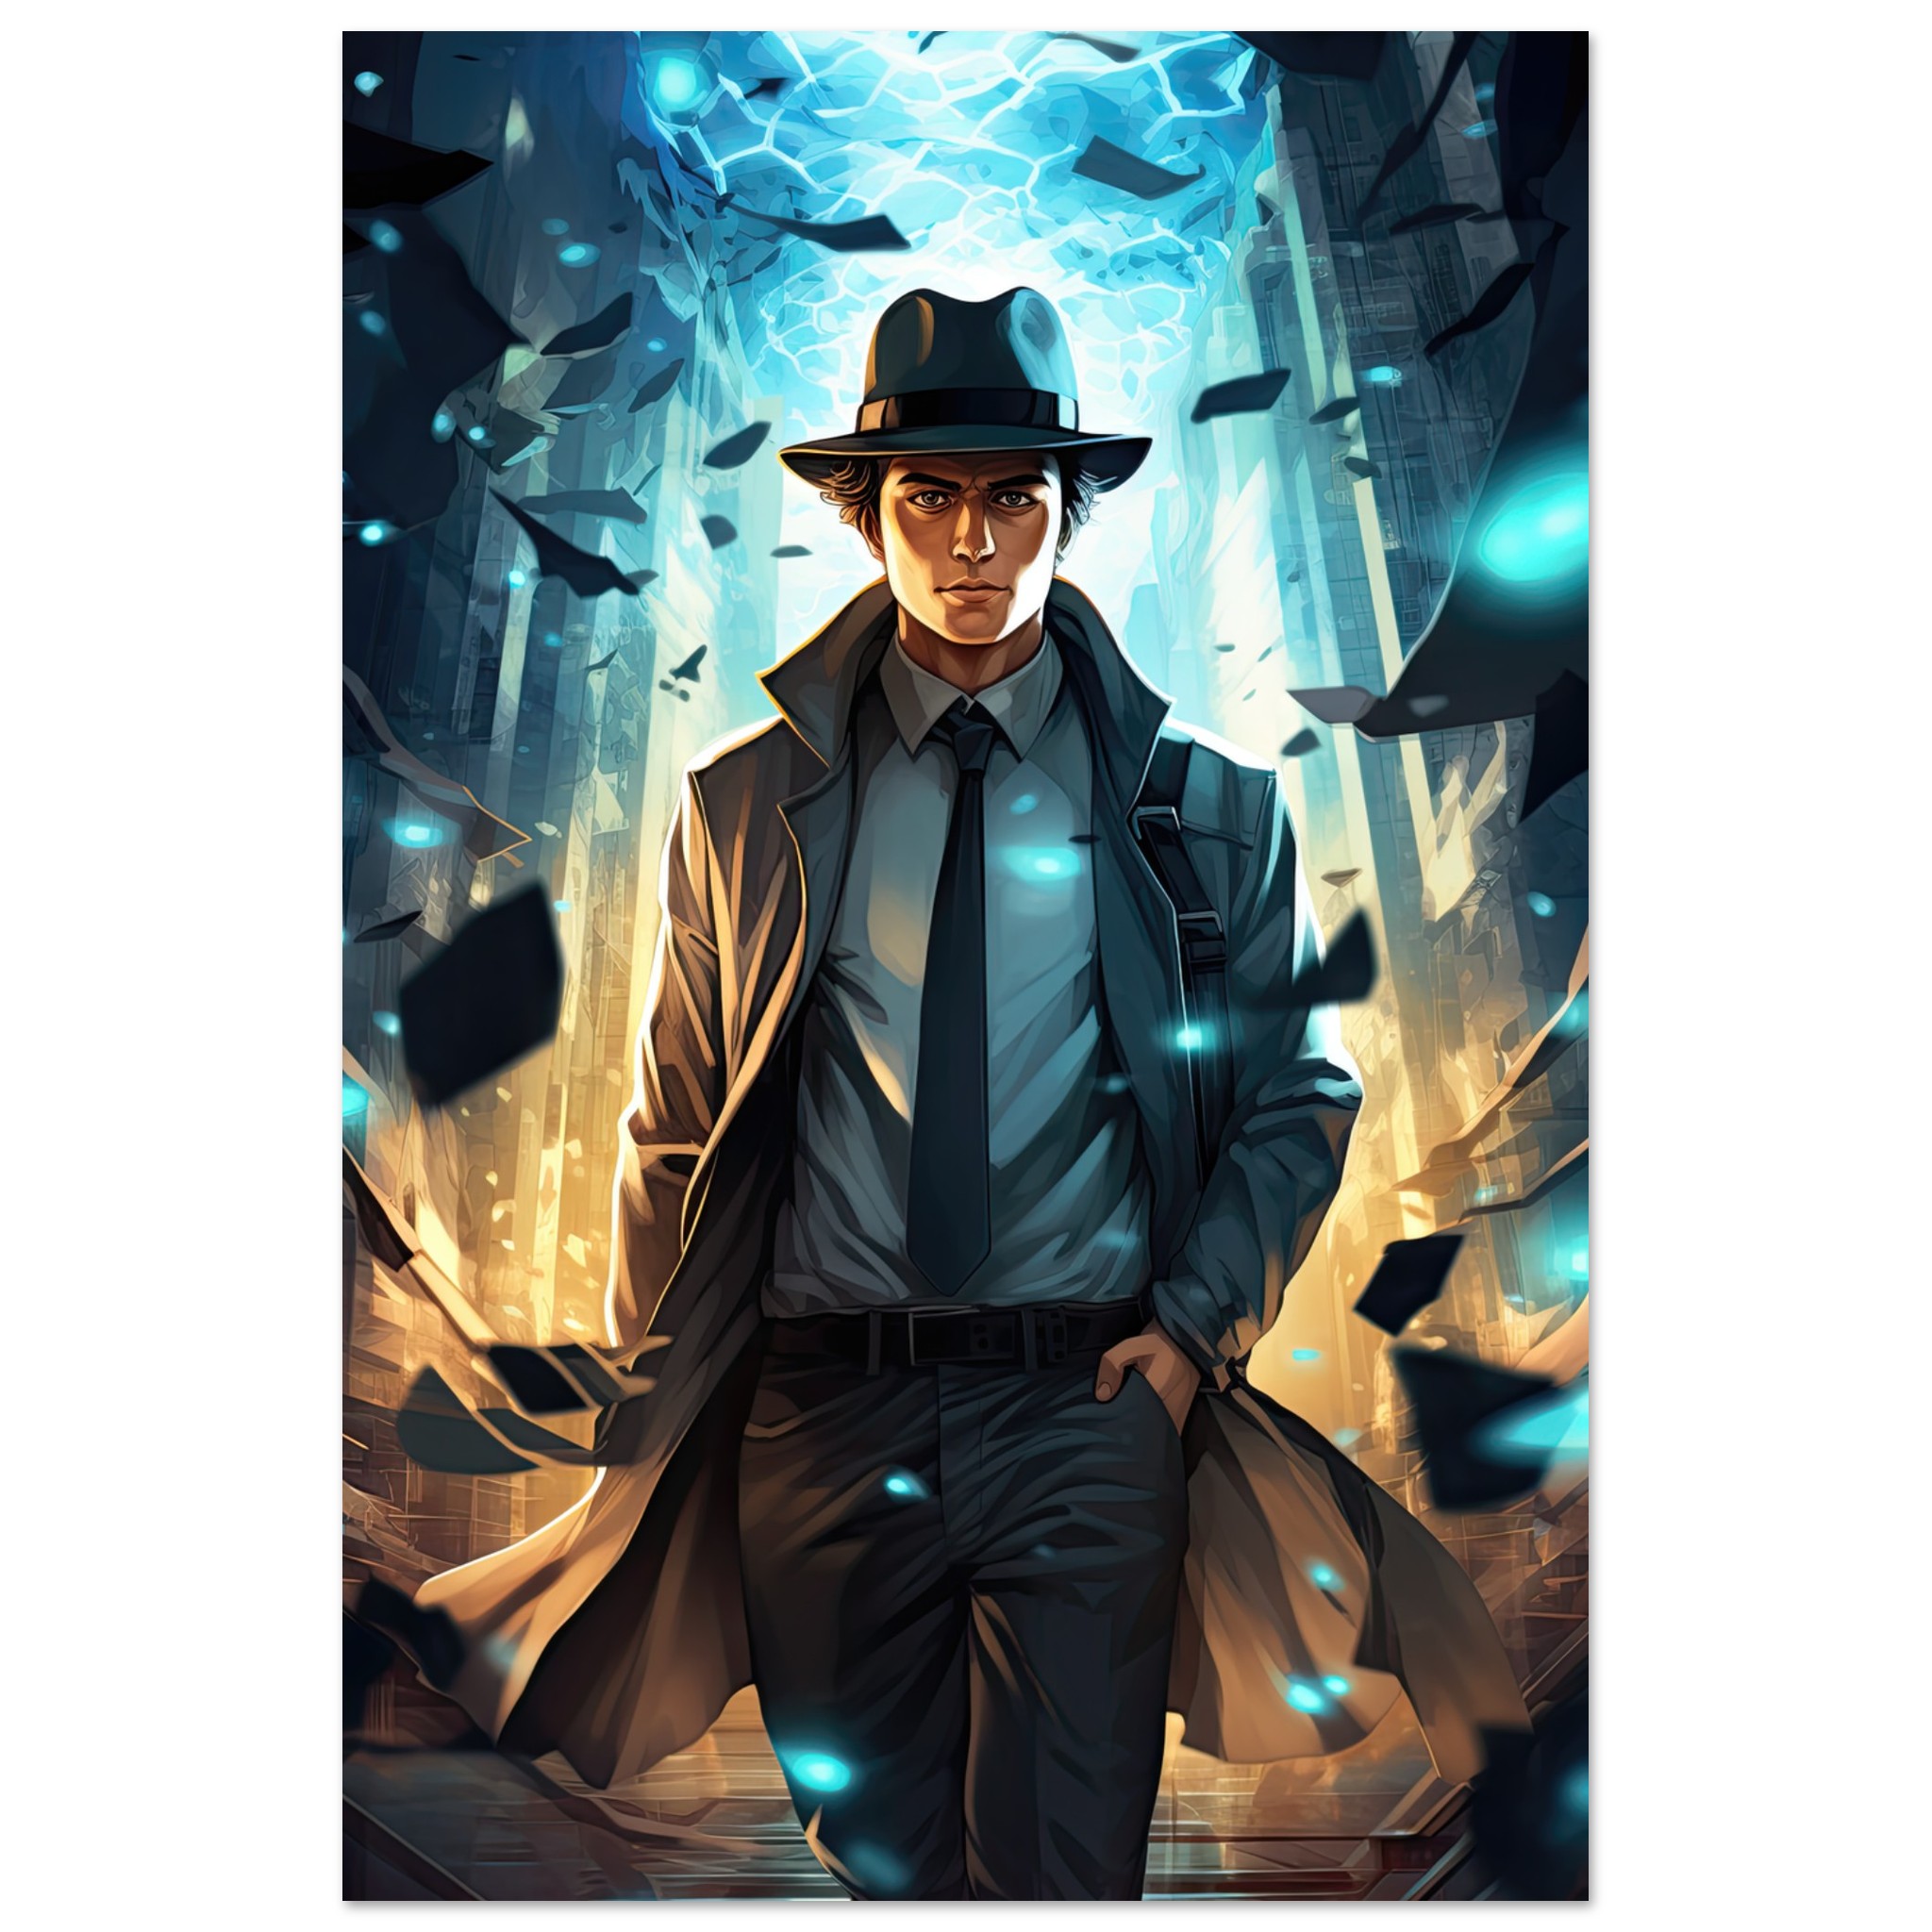 Dimension Hopping Detective Poster – 30×45 cm / 12×18″